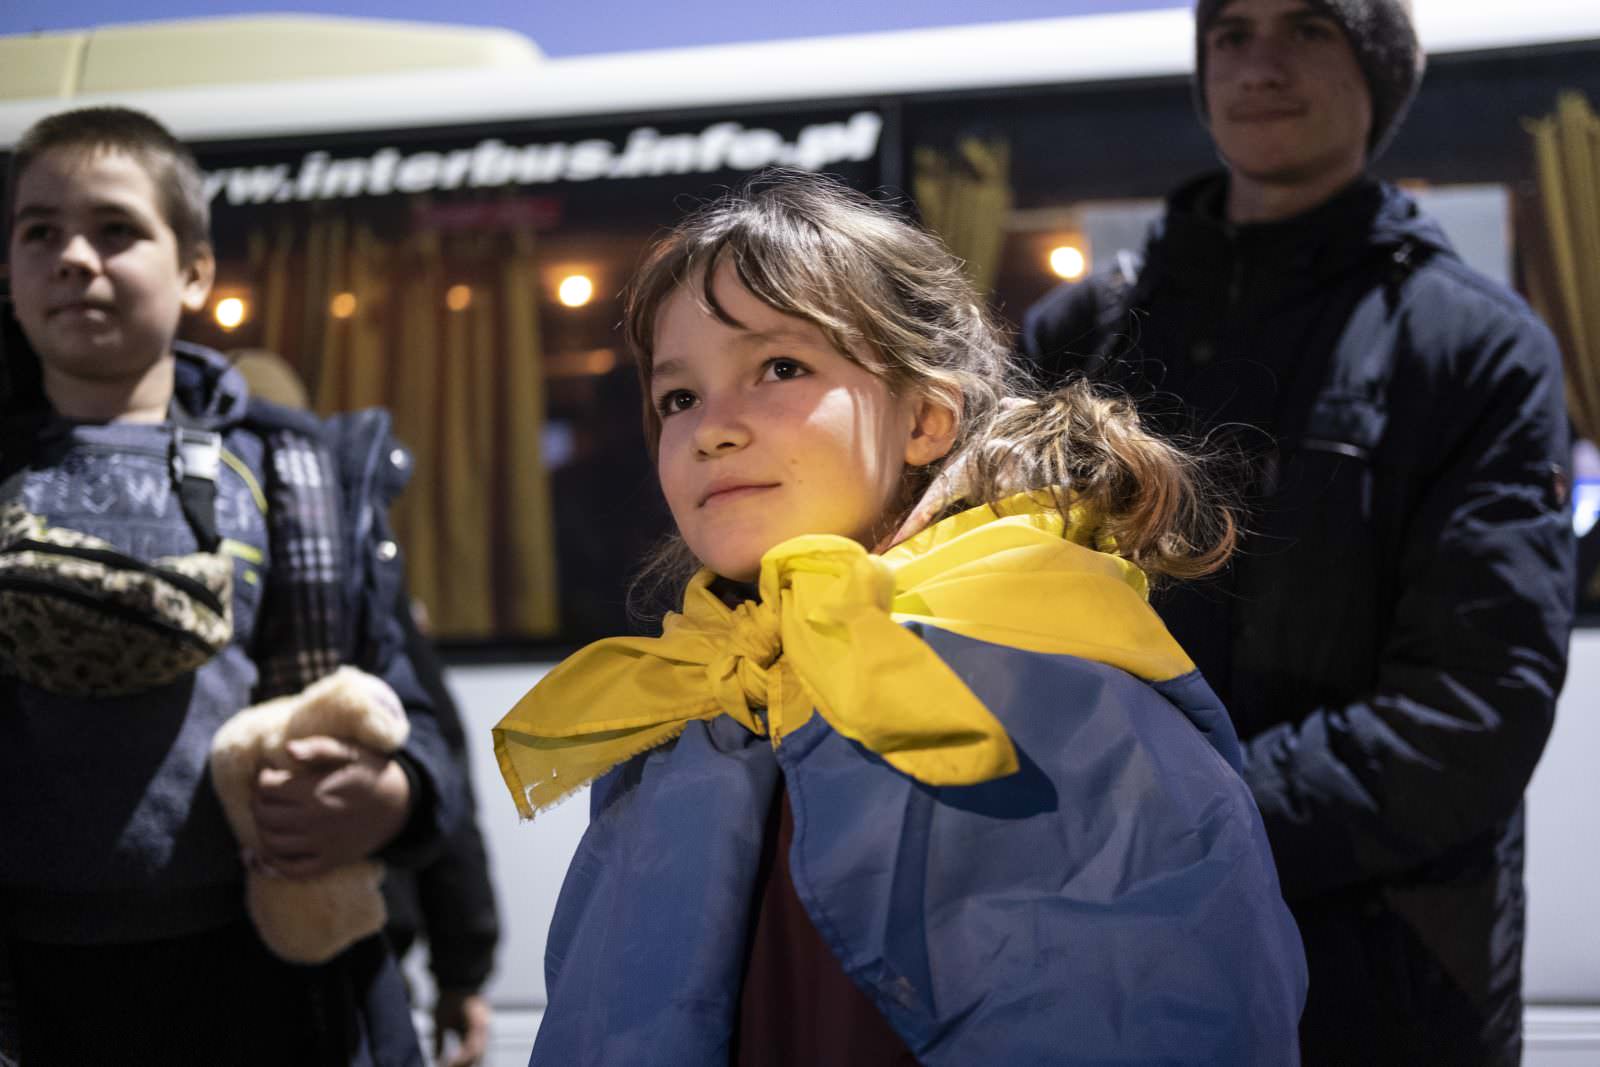 Eight-year-old Anastasia Kulchyckiy waits at the Medyka crossing point for a bus to the nearby town of Przemysl with her father Mykolay, 51, and her brothers Mihailo, 14, and Dmytriy, 17 after arriving from Ukraine. Medyka is the largest crossing point for refugees from Ukraine. Most need a place to pause, regroup and recover before moving on to other cities in Poland or beyond. ; By 21 March, more than 10 million people had been forced to flee their homes because of the war in Ukraine, many displaced inside the country and more than 3 million as refugees abroad. Within three weeks, arrivals in Poland passed the 2 million mark. UNHCR has been working with national authorities, local administrations, municipalities and civil society to cope with the influx.